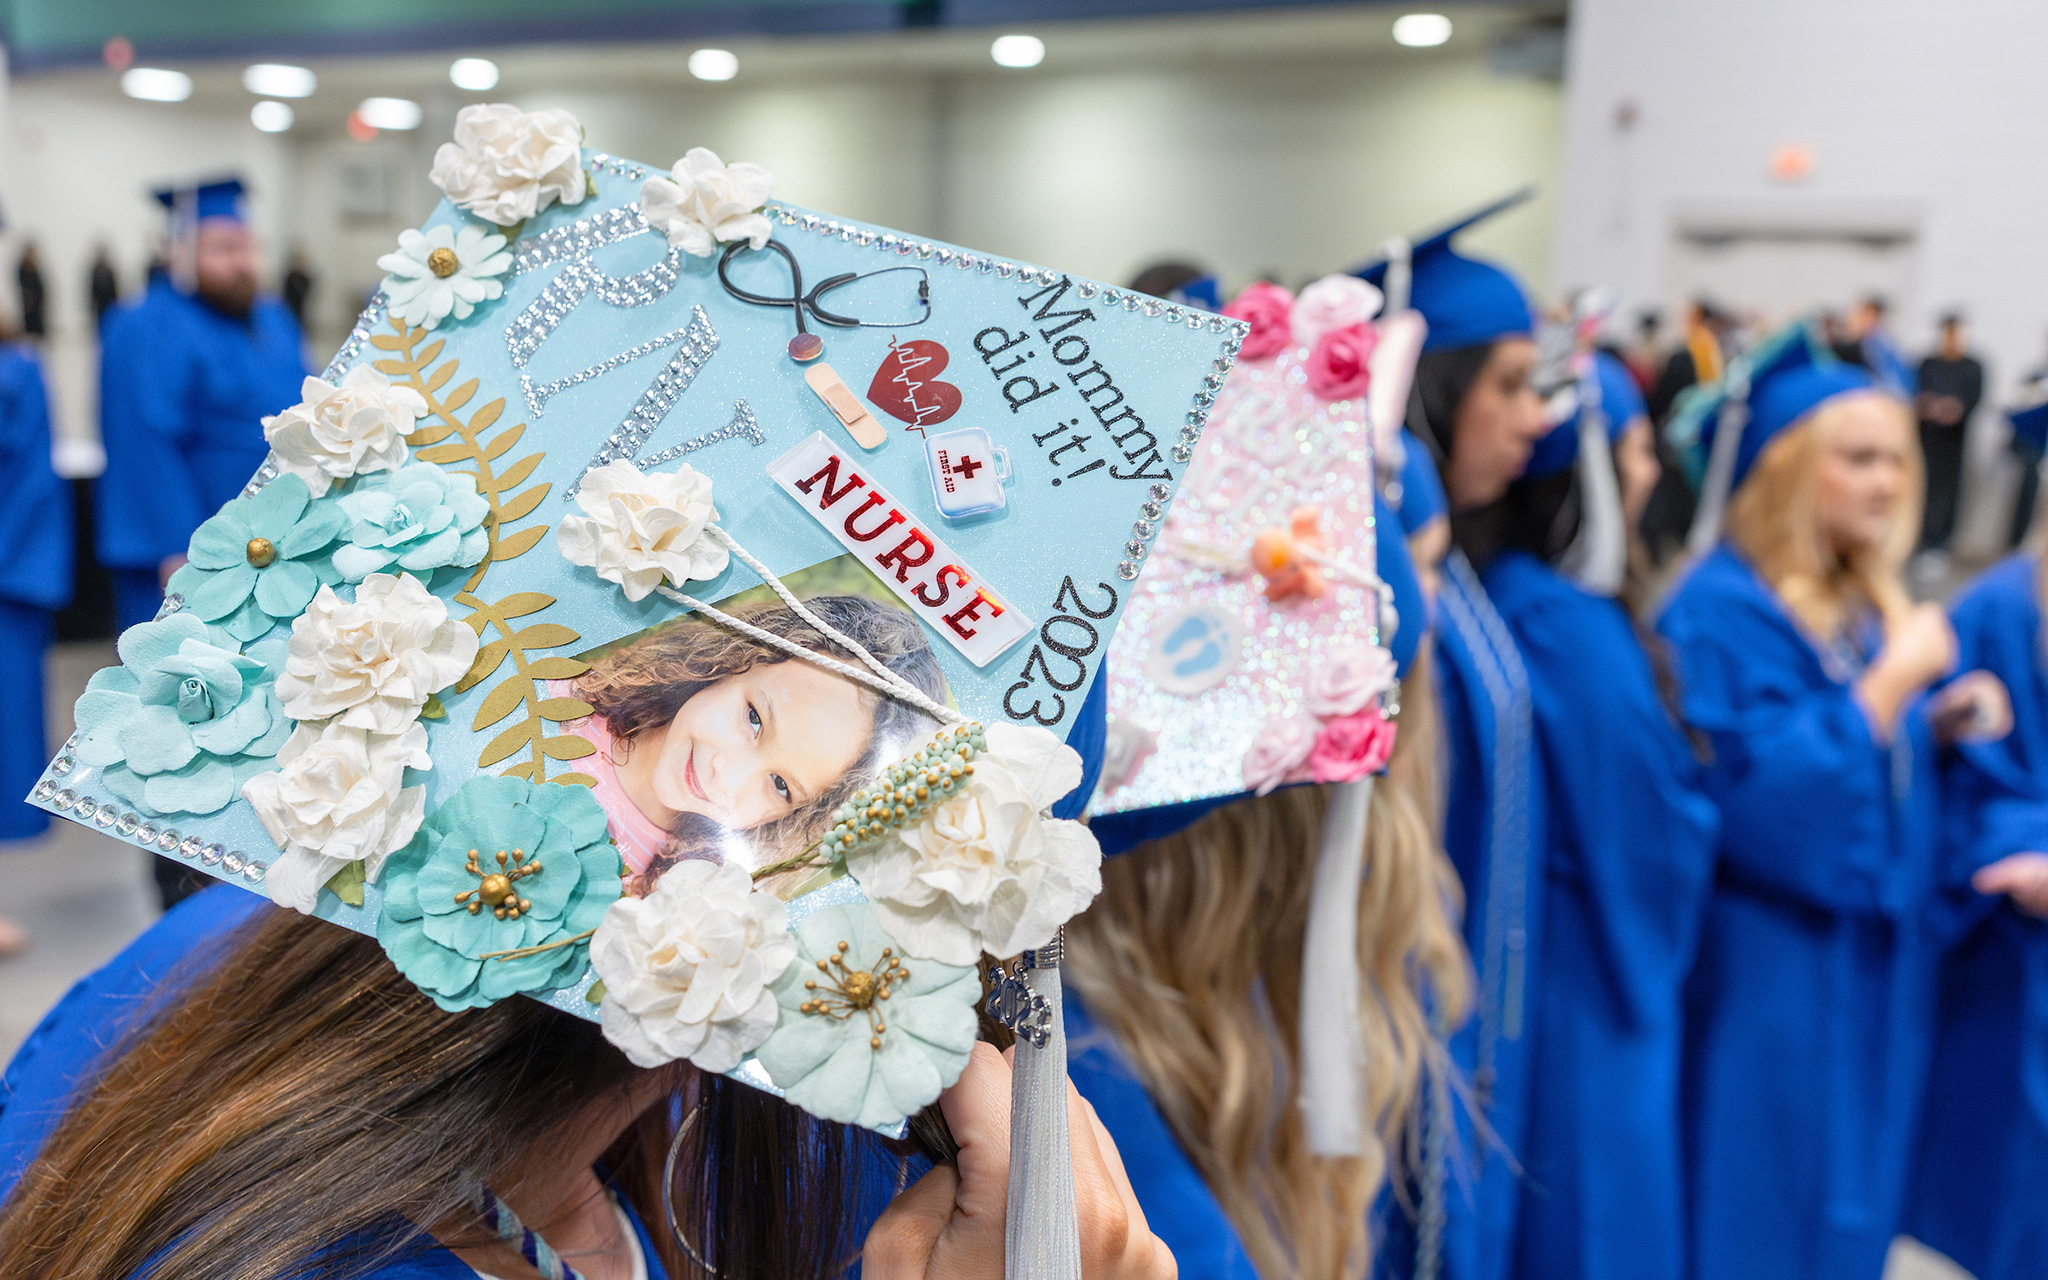 A nursing graduate’s decorated mortar board is displayed as the graduates wait to line up at Randolph Community College’s 2023 Curriculum Graduation, held Wednesday, May 10, at the Special Events Center of the Greensboro Coliseum Complex.